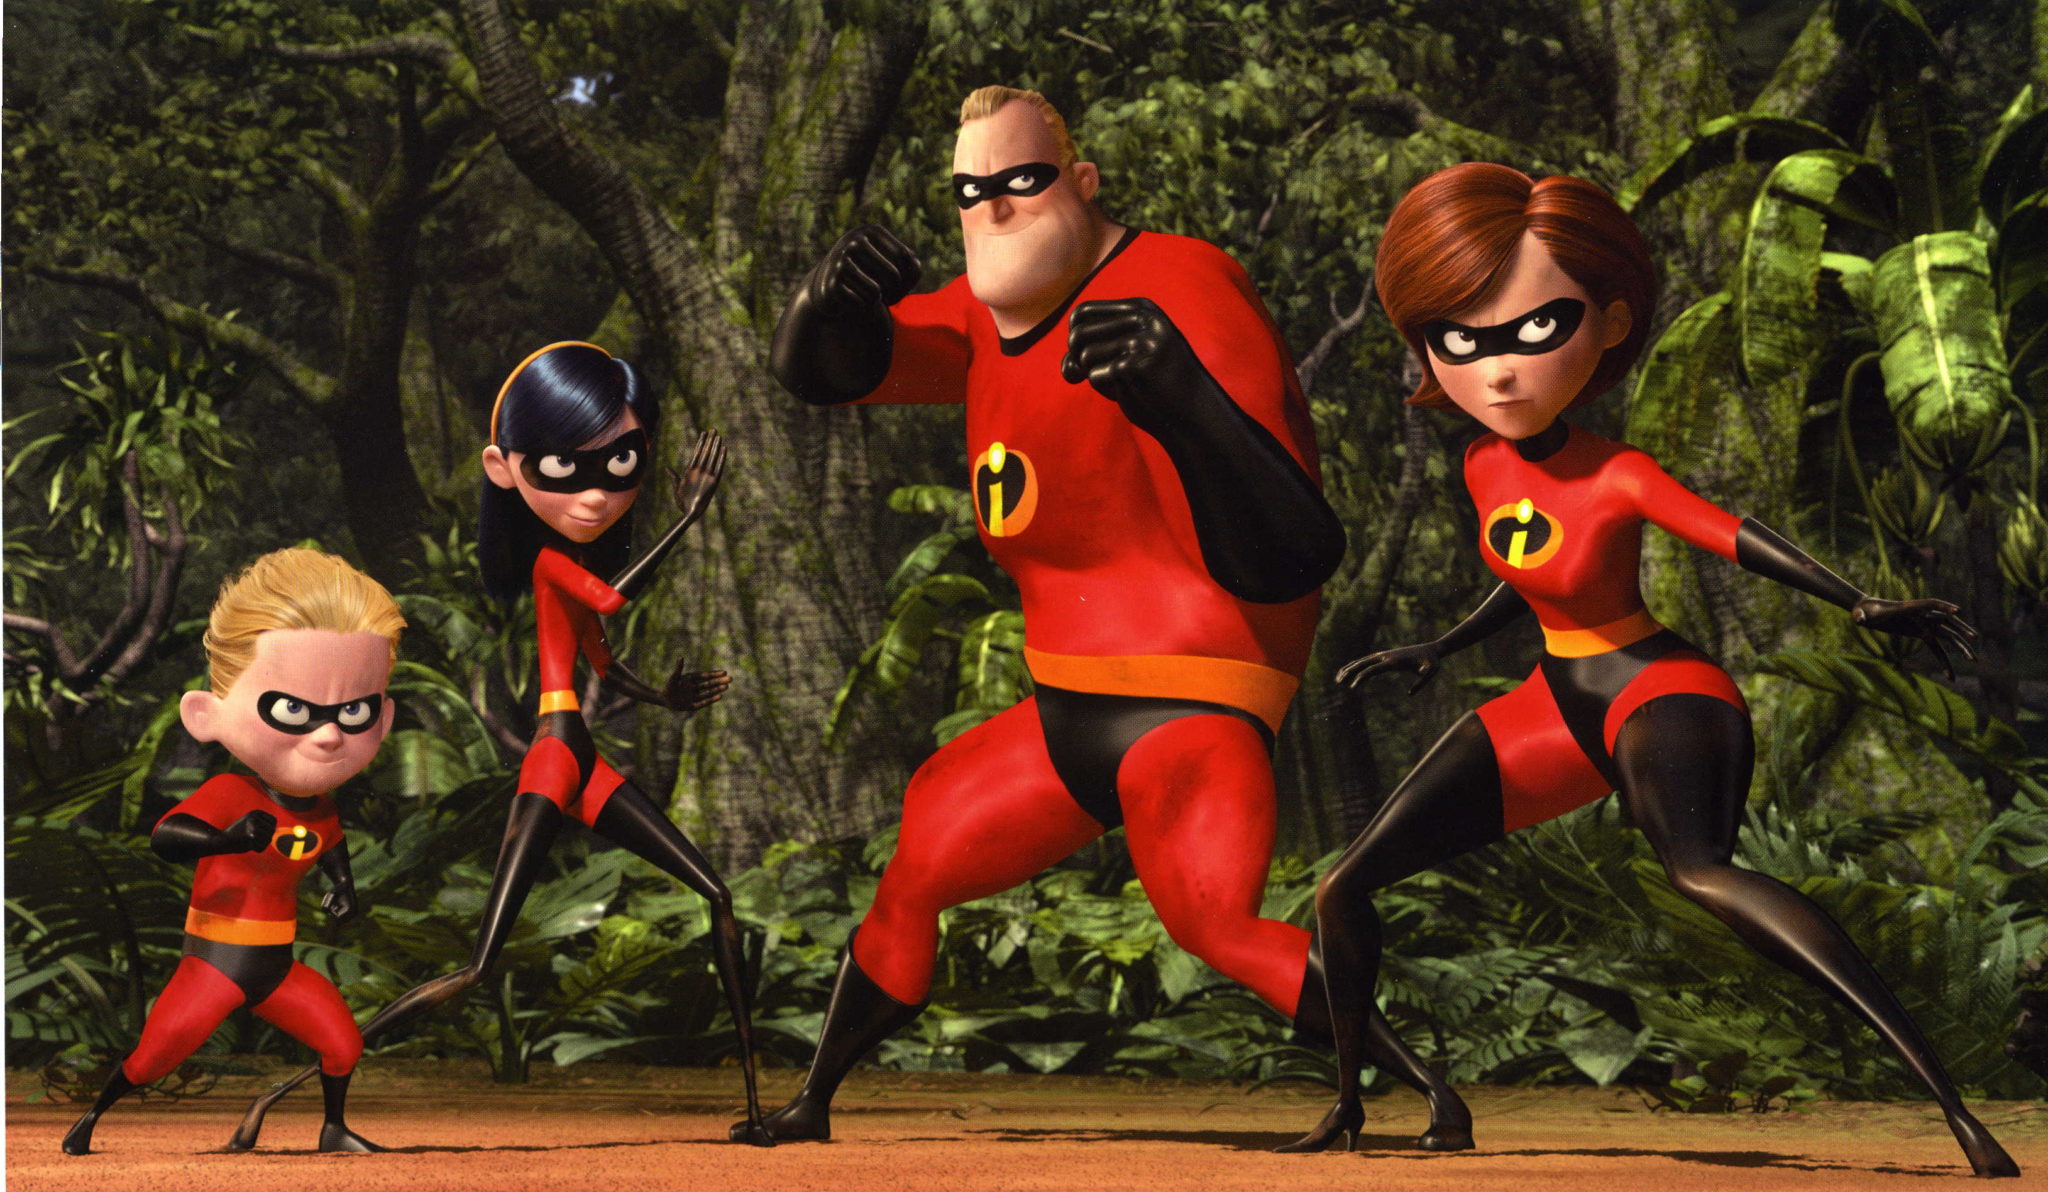 Why 'The Incredibles' Is One of Pixar's Best Movies - Rotoscopers